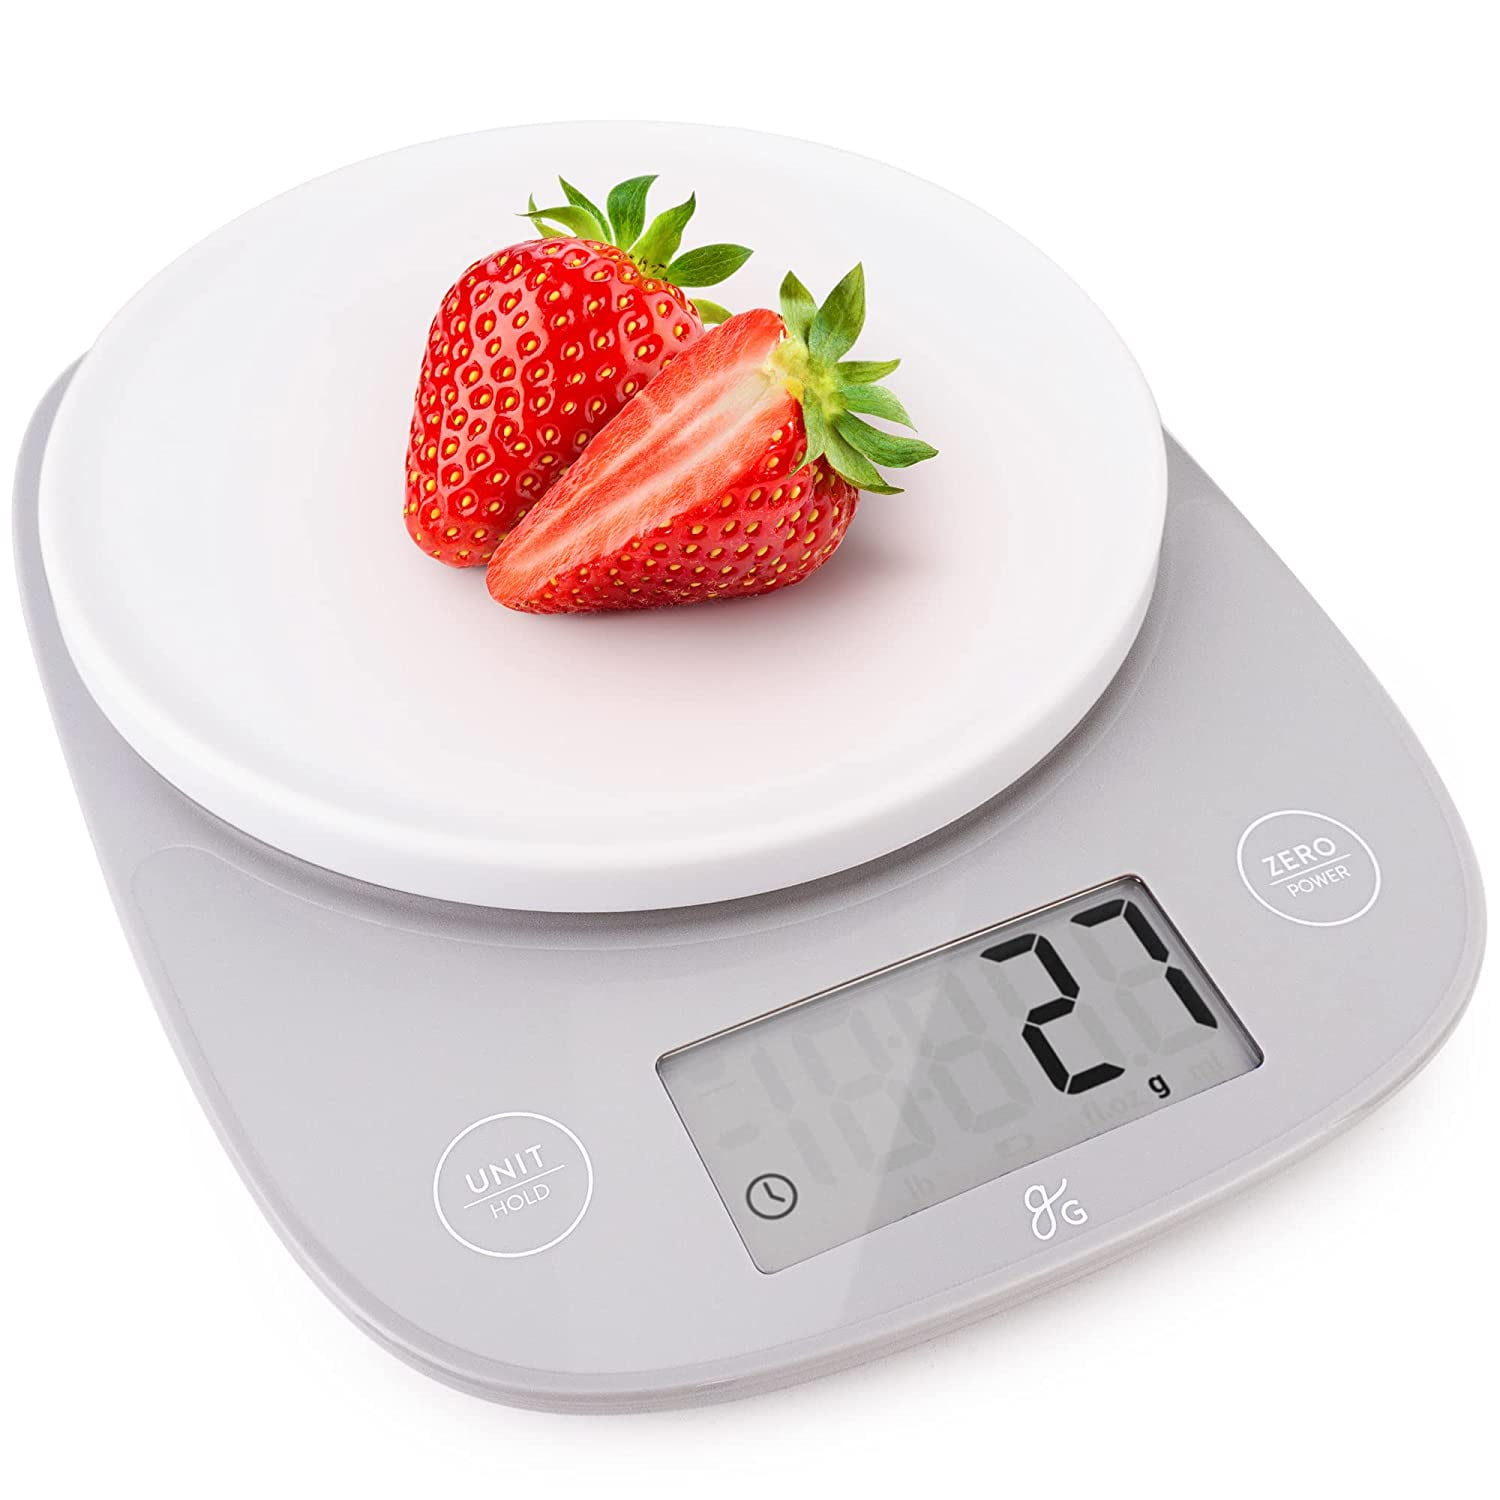 Greater Goods Premium Baking Scale - Ultra Accurate, Digital Kitchen Scale | Prep Baked Goods, Weigh Food and Coffee, or Use for Meal Prep | Four